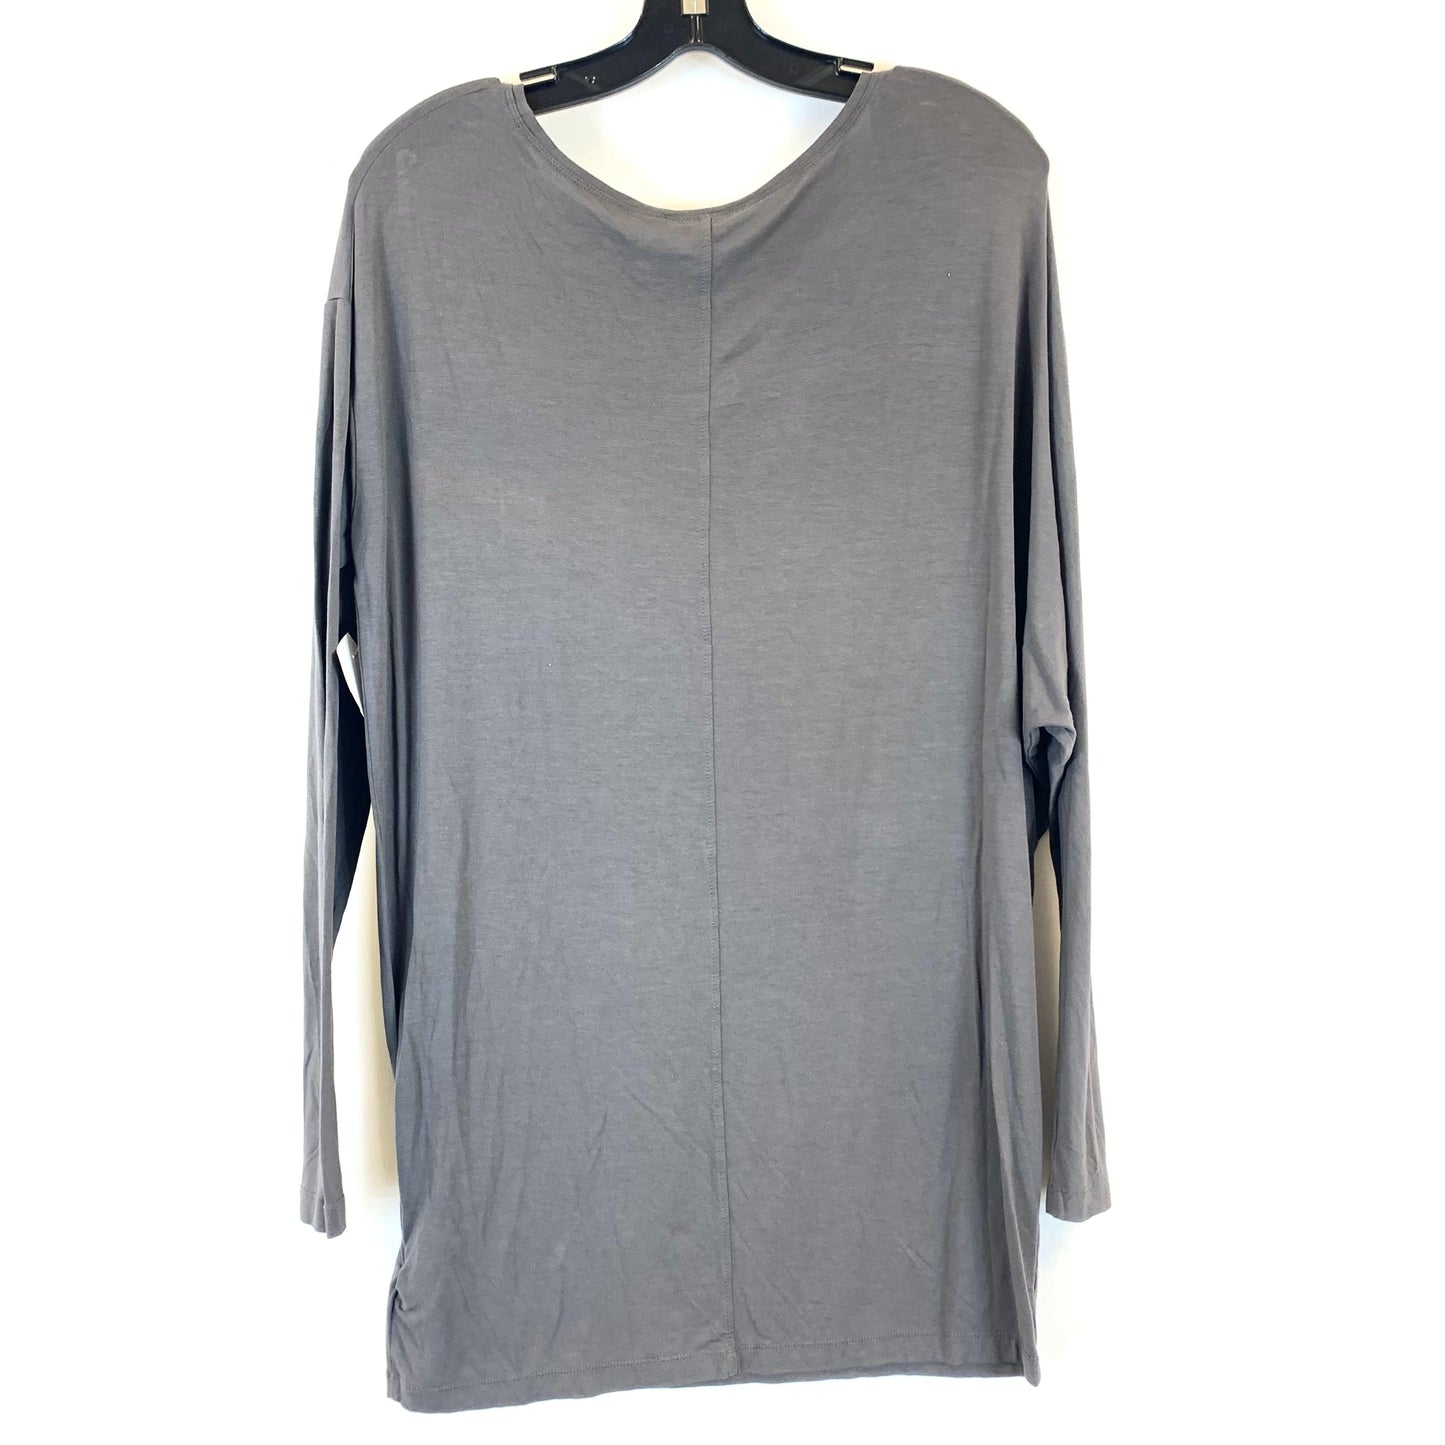 Top Long Sleeve Basic By Vince  Size: M